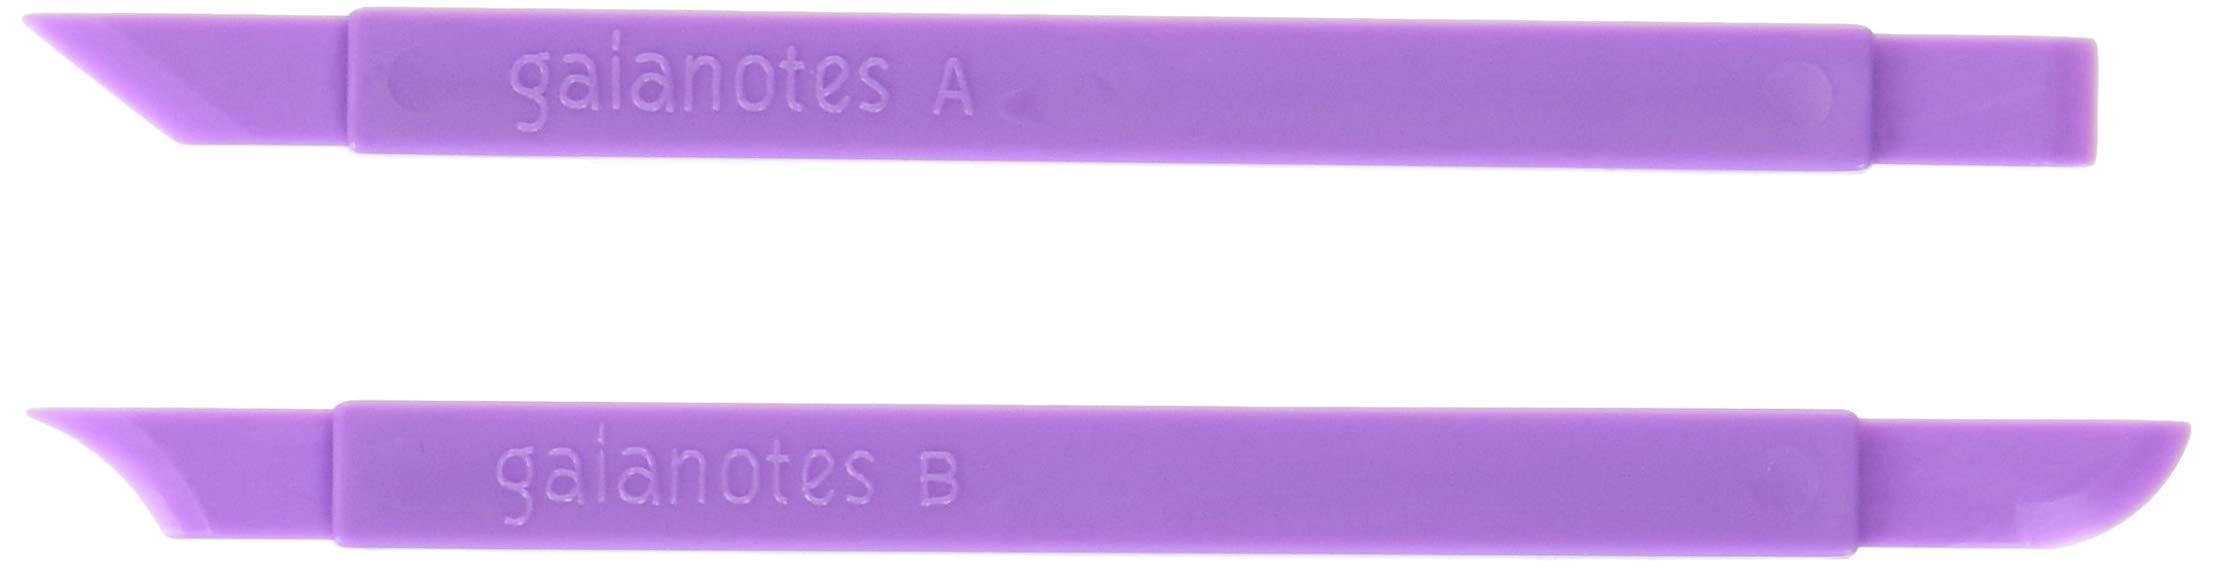 GAIANOTES G-16 Putty Stick 2 Types 1 Ea. Set Hobby Tools